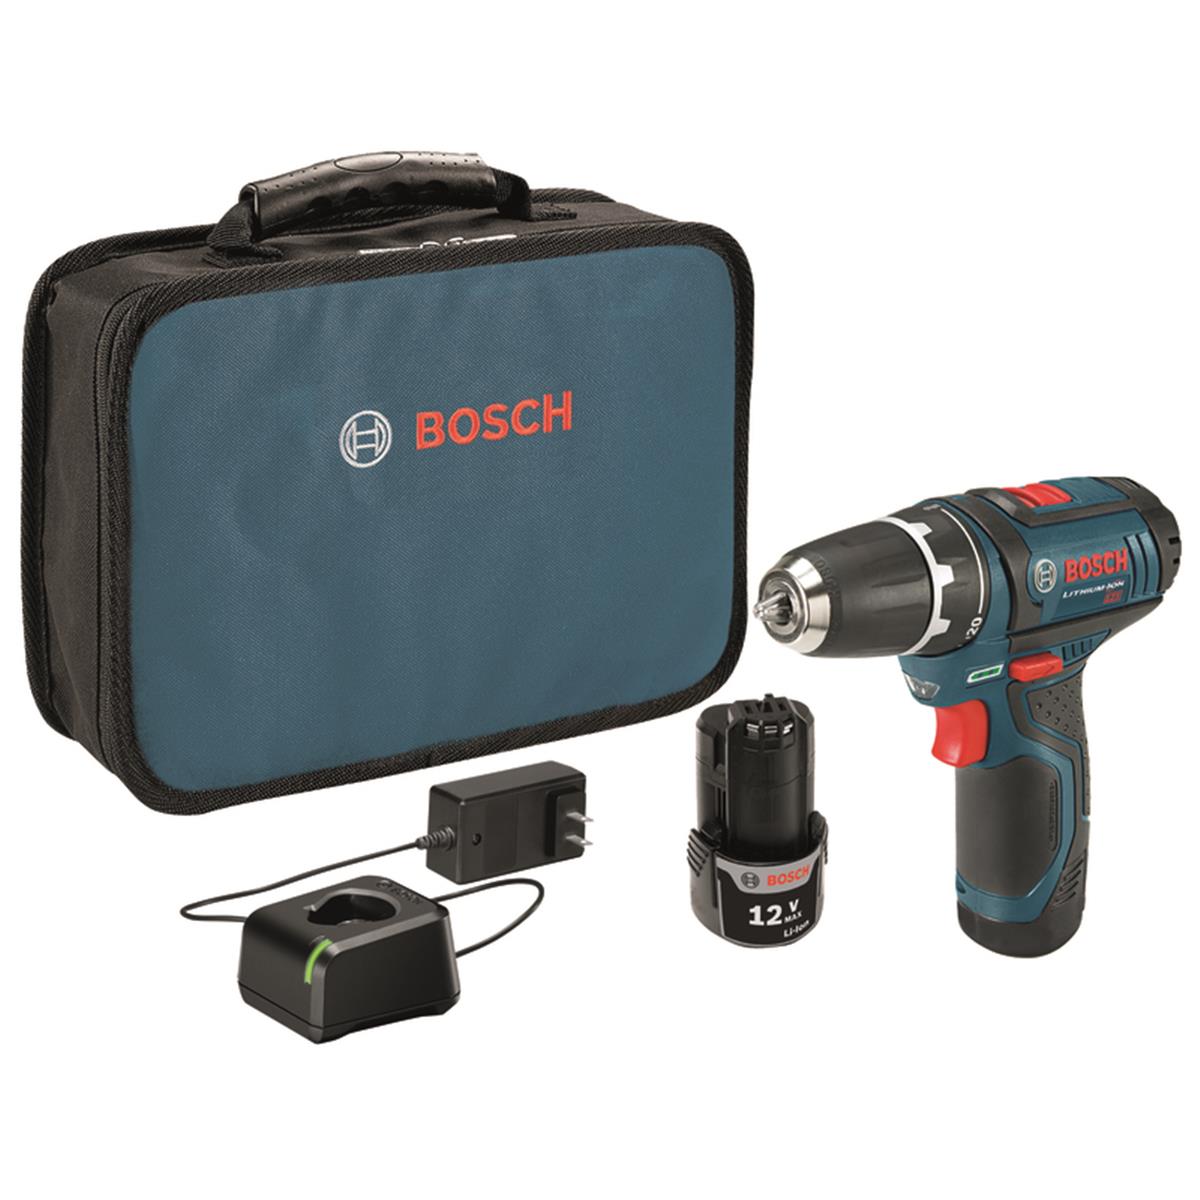 Picture of Bosch 2014063 0.375 in. 12V Brushed Cordless Compact Drill Kit with Battery & Charger